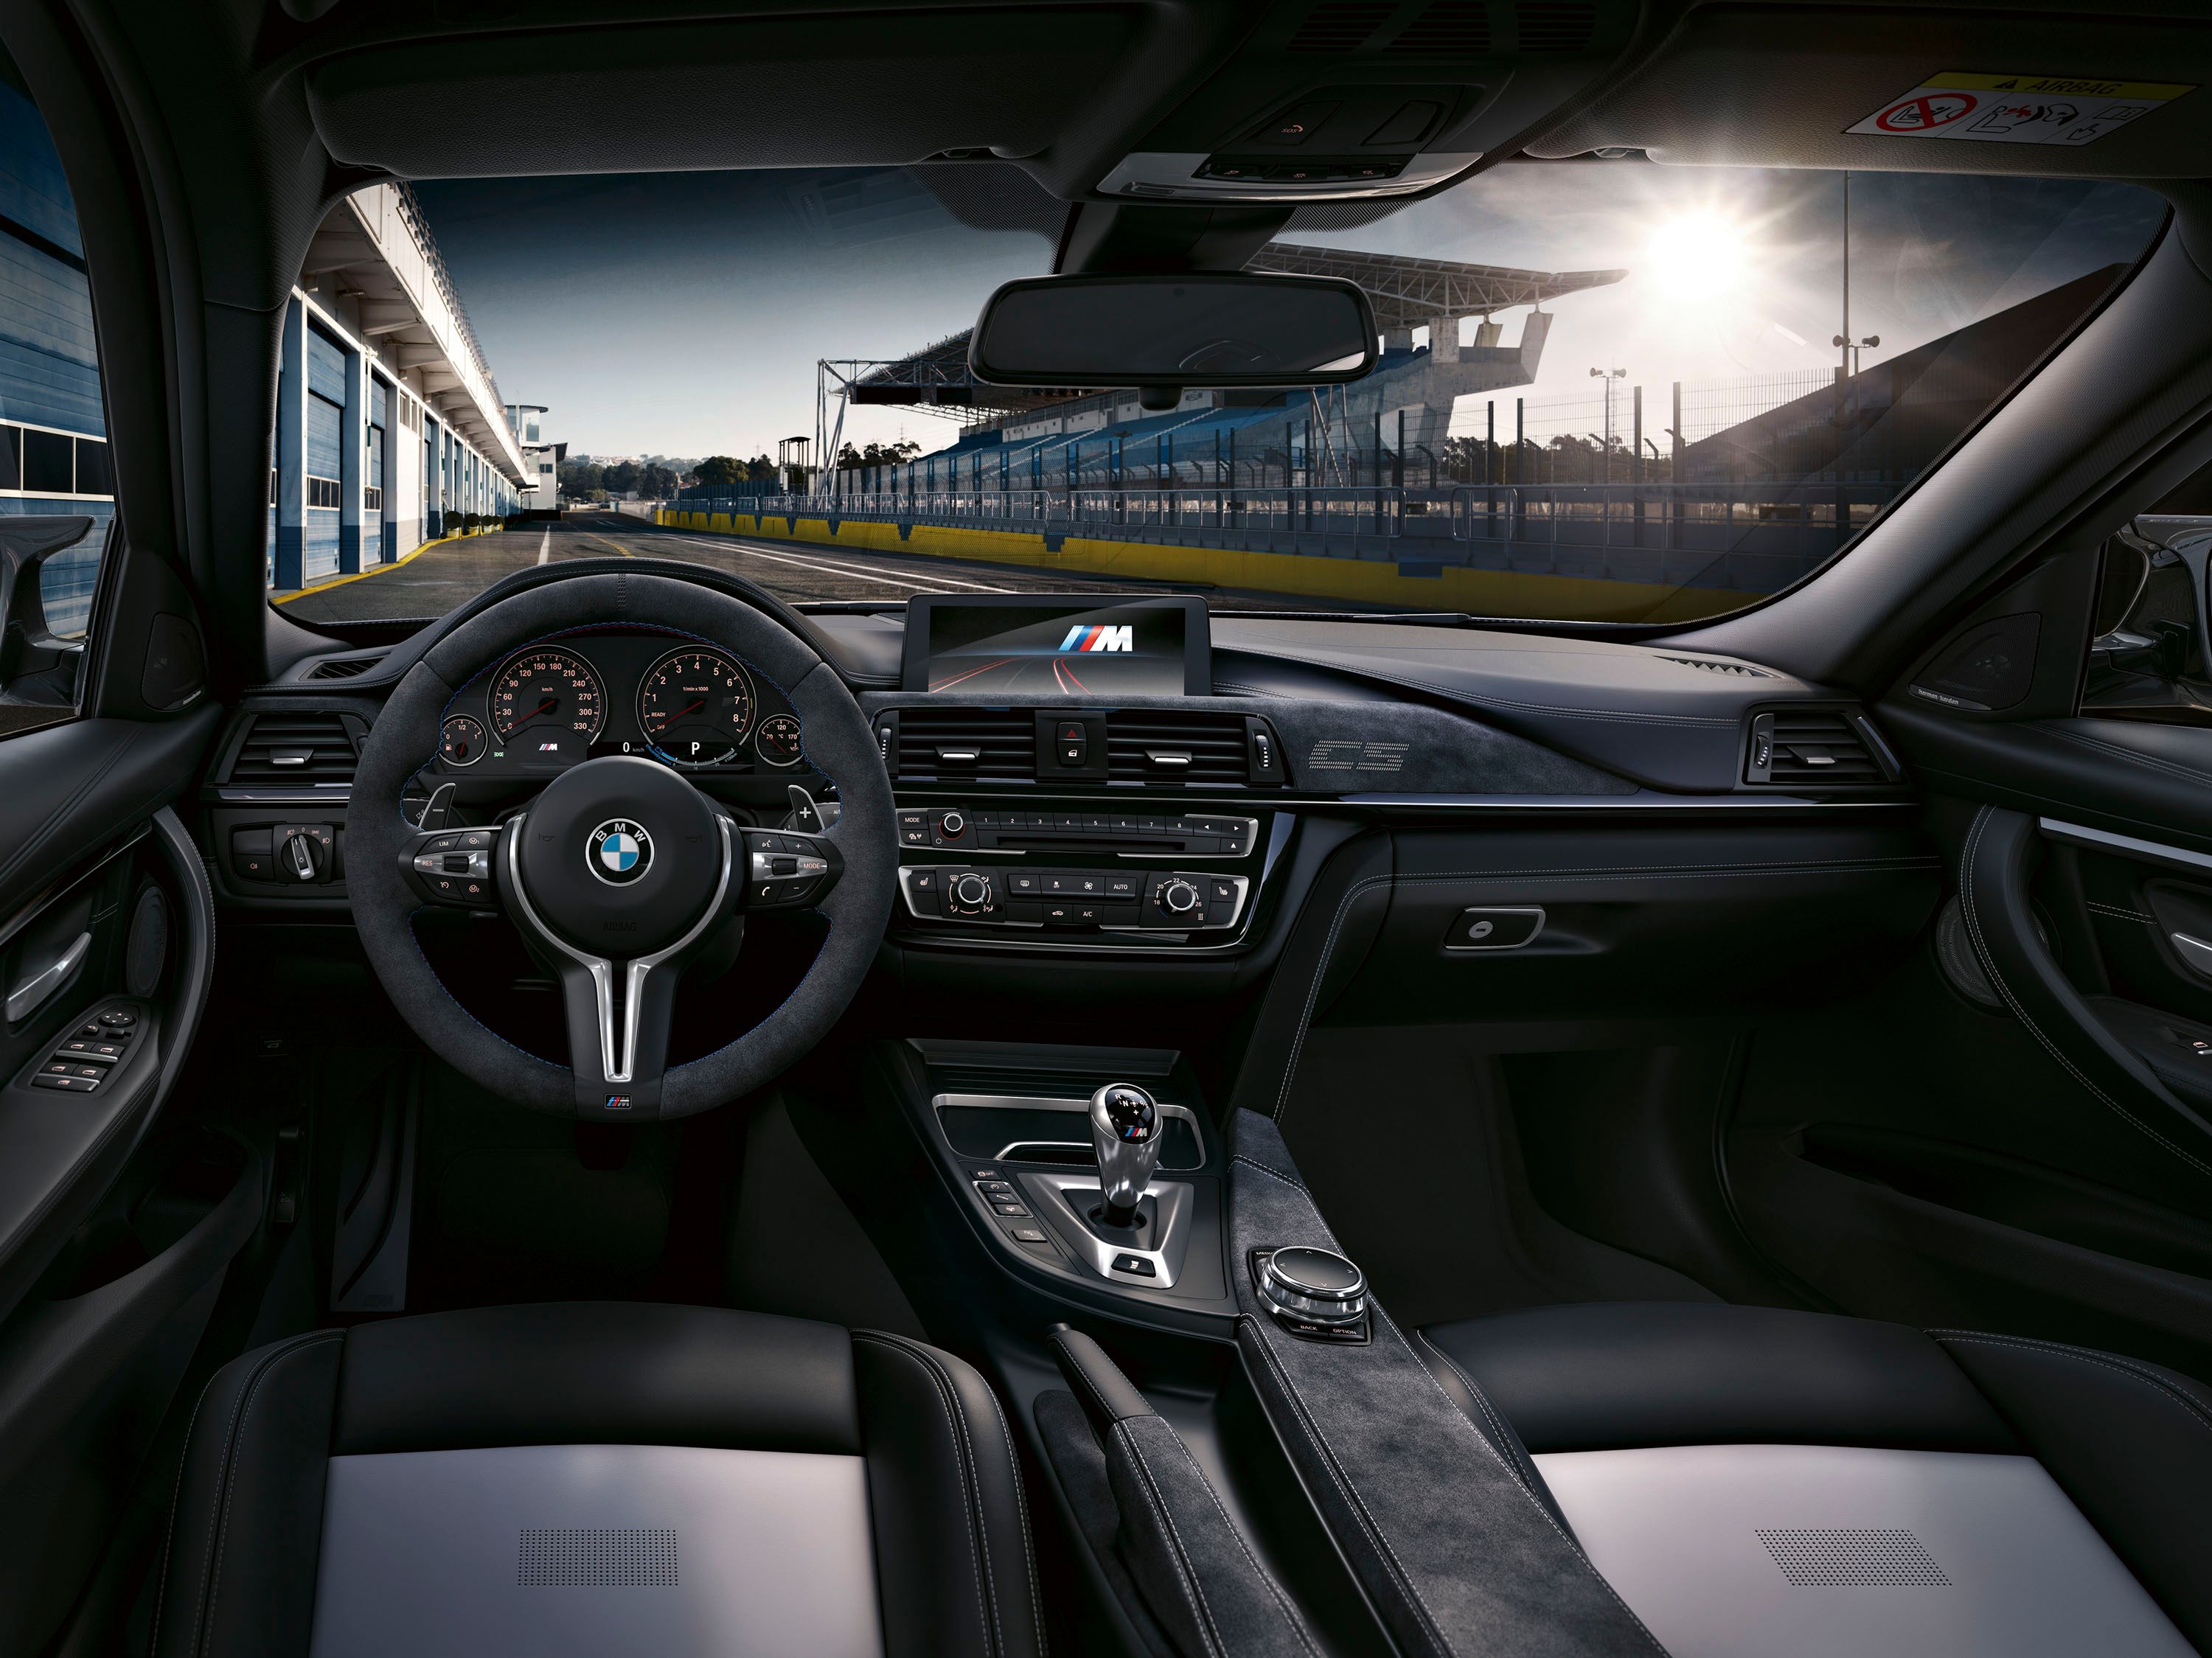 No roll-cage like the M4 CS